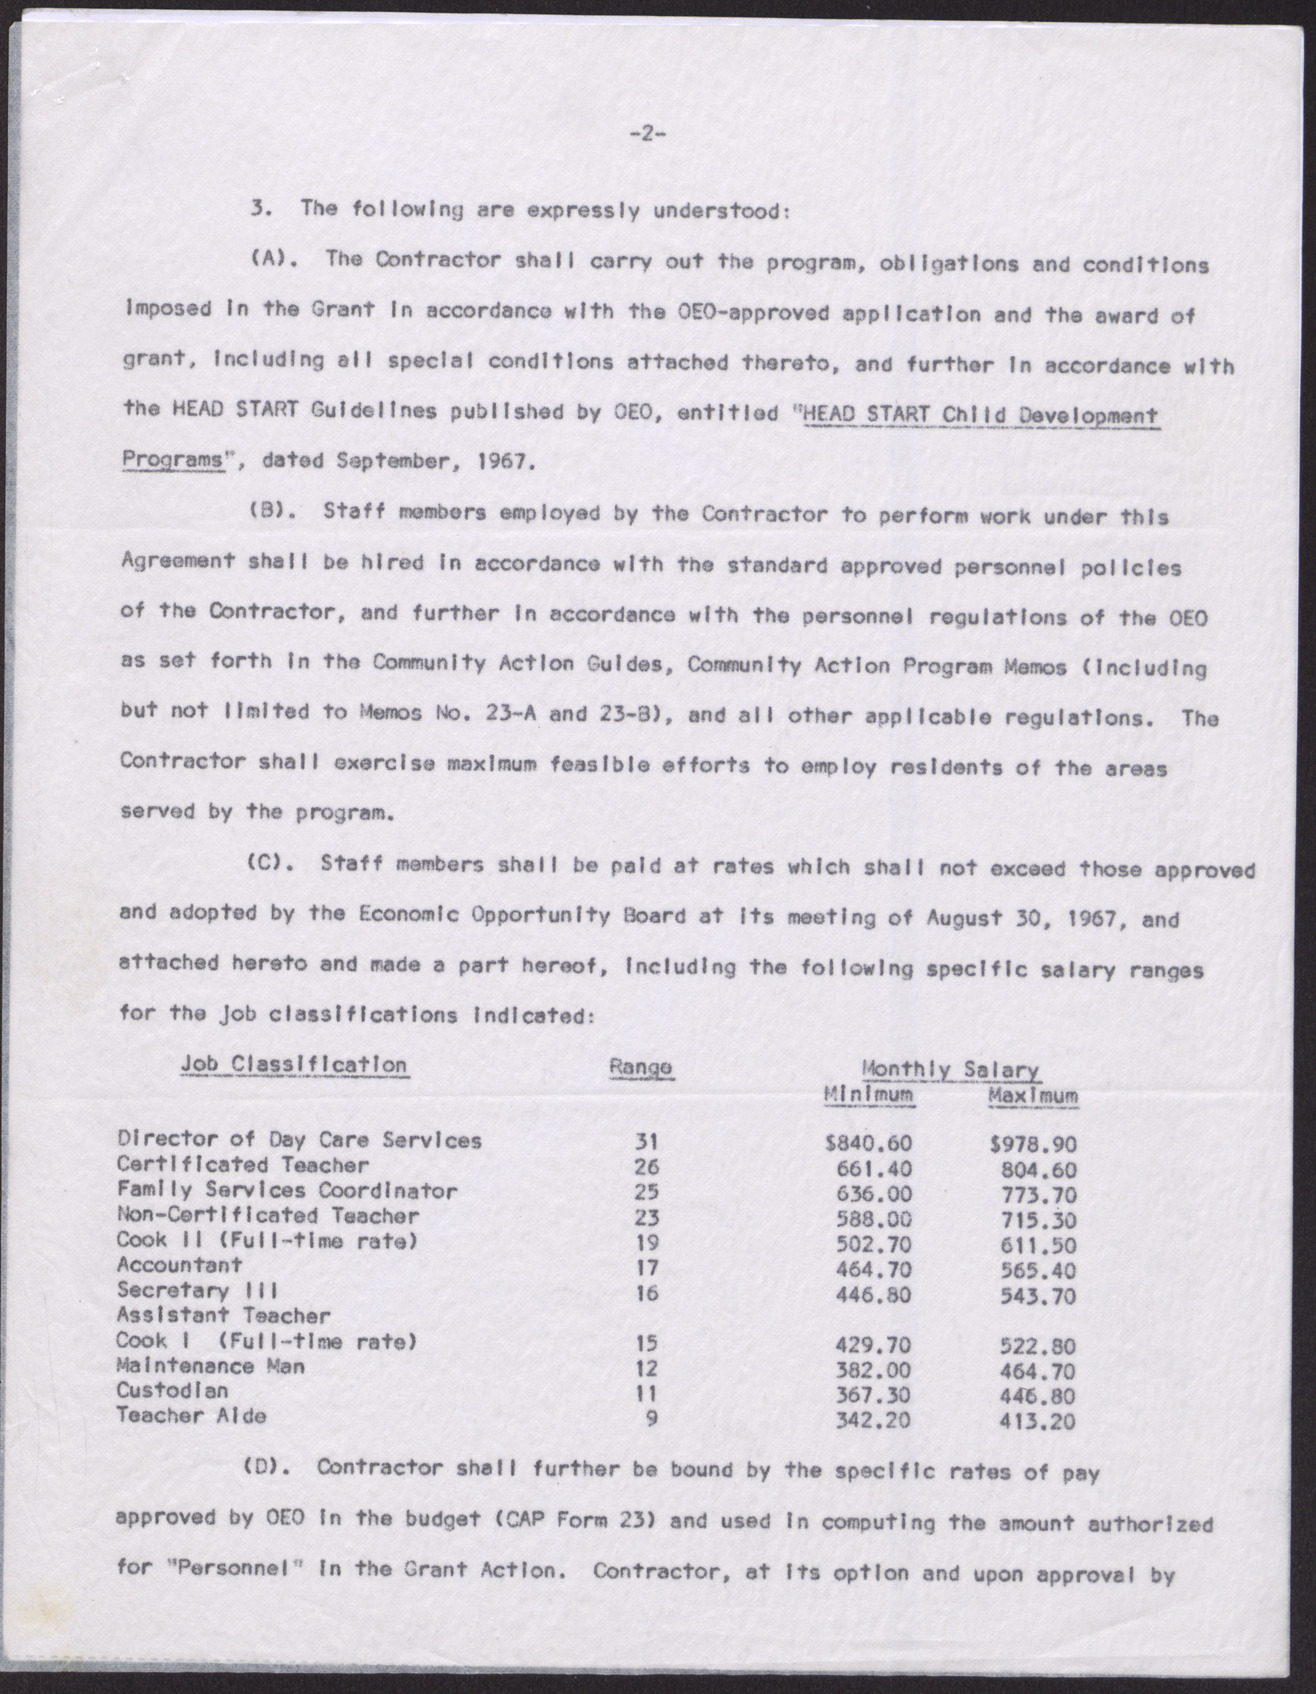 Contract of agreement between the EOB ad Operation Independence, Inc. (6 pages), January 1, 1968, page 2